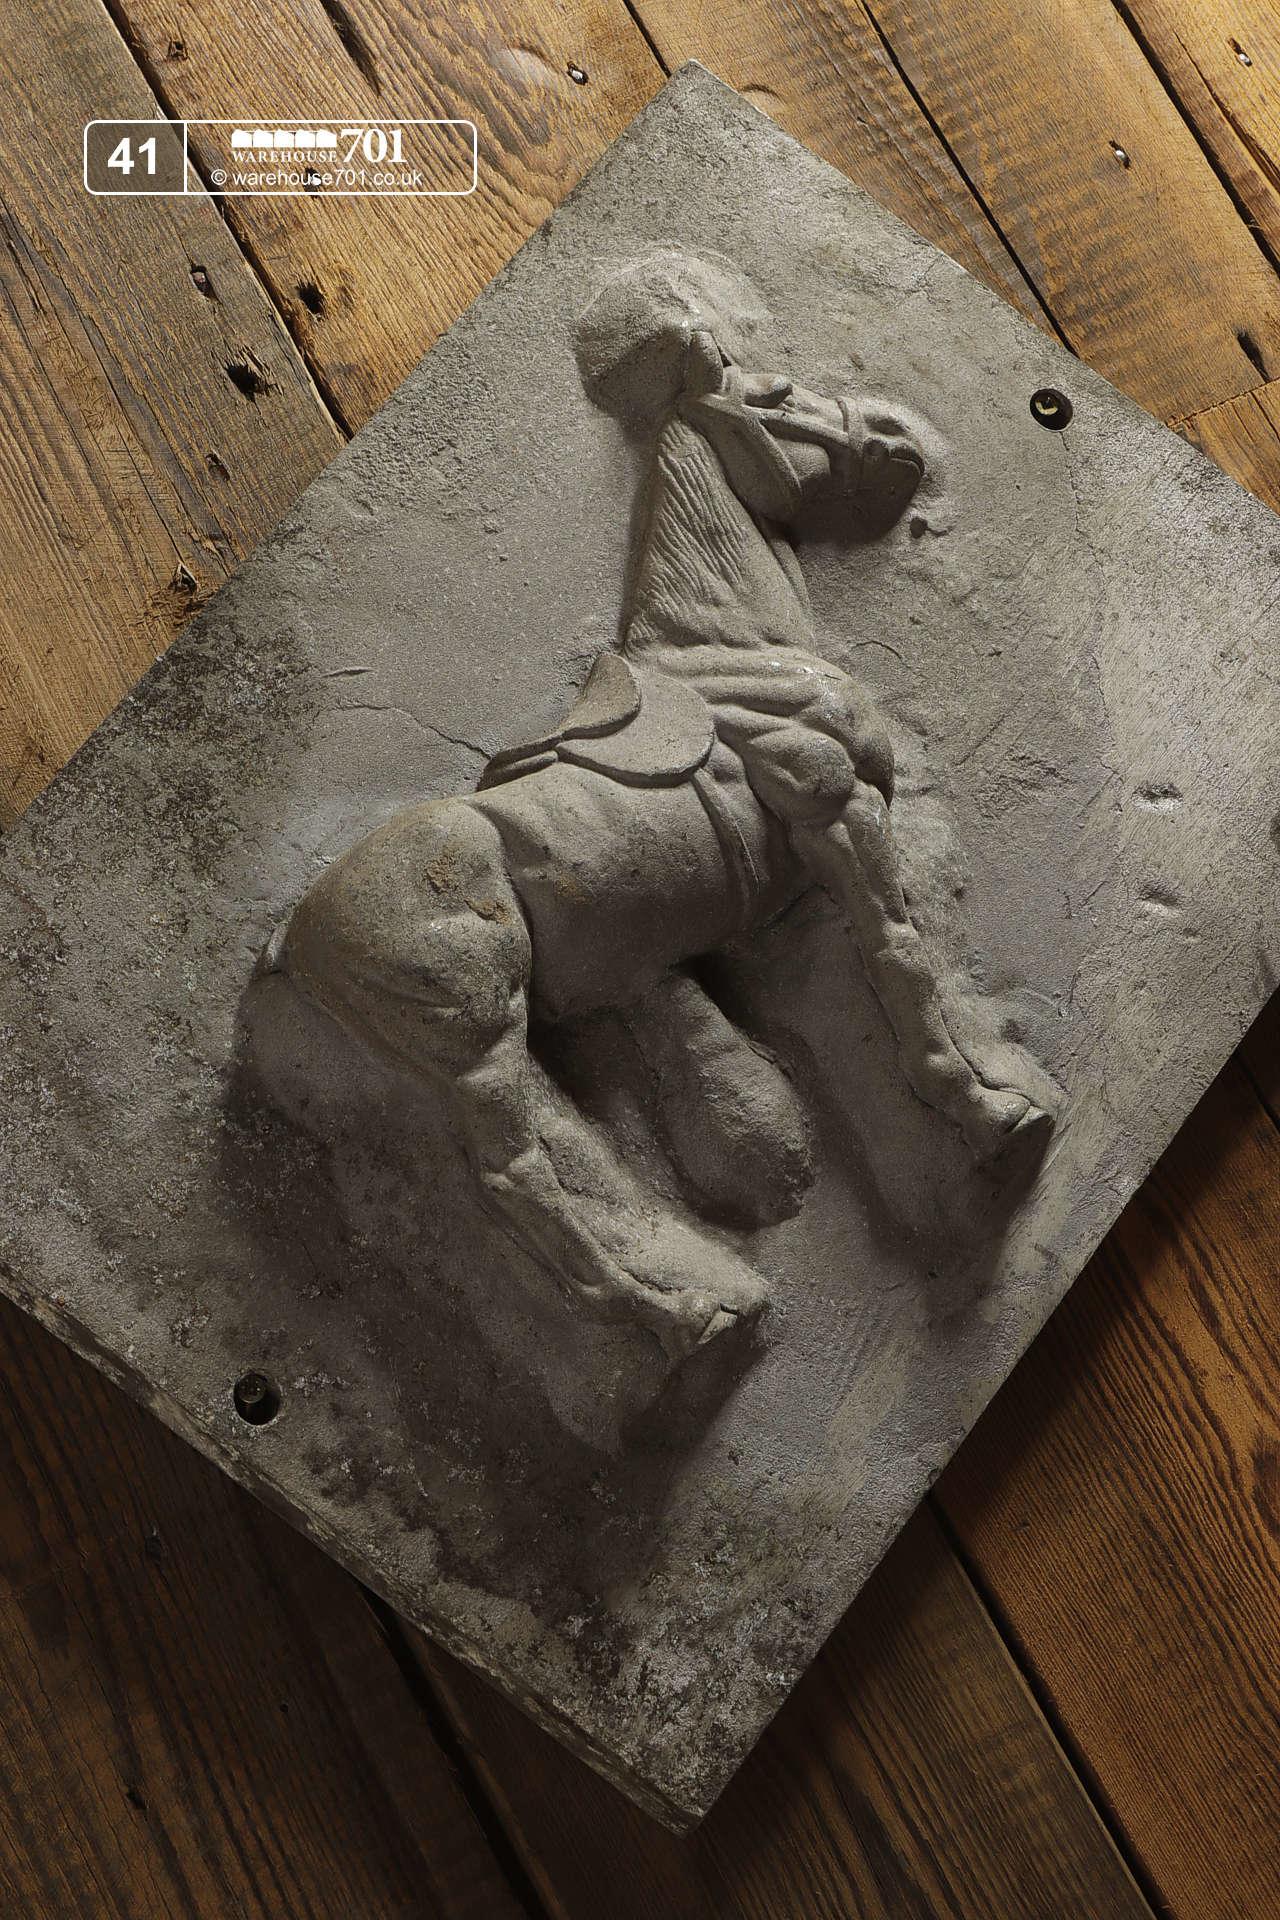 Aluminium Foundry Castings of Horses (No's 38, 39, 40, 41) for Shop, Retail and Home Display #12